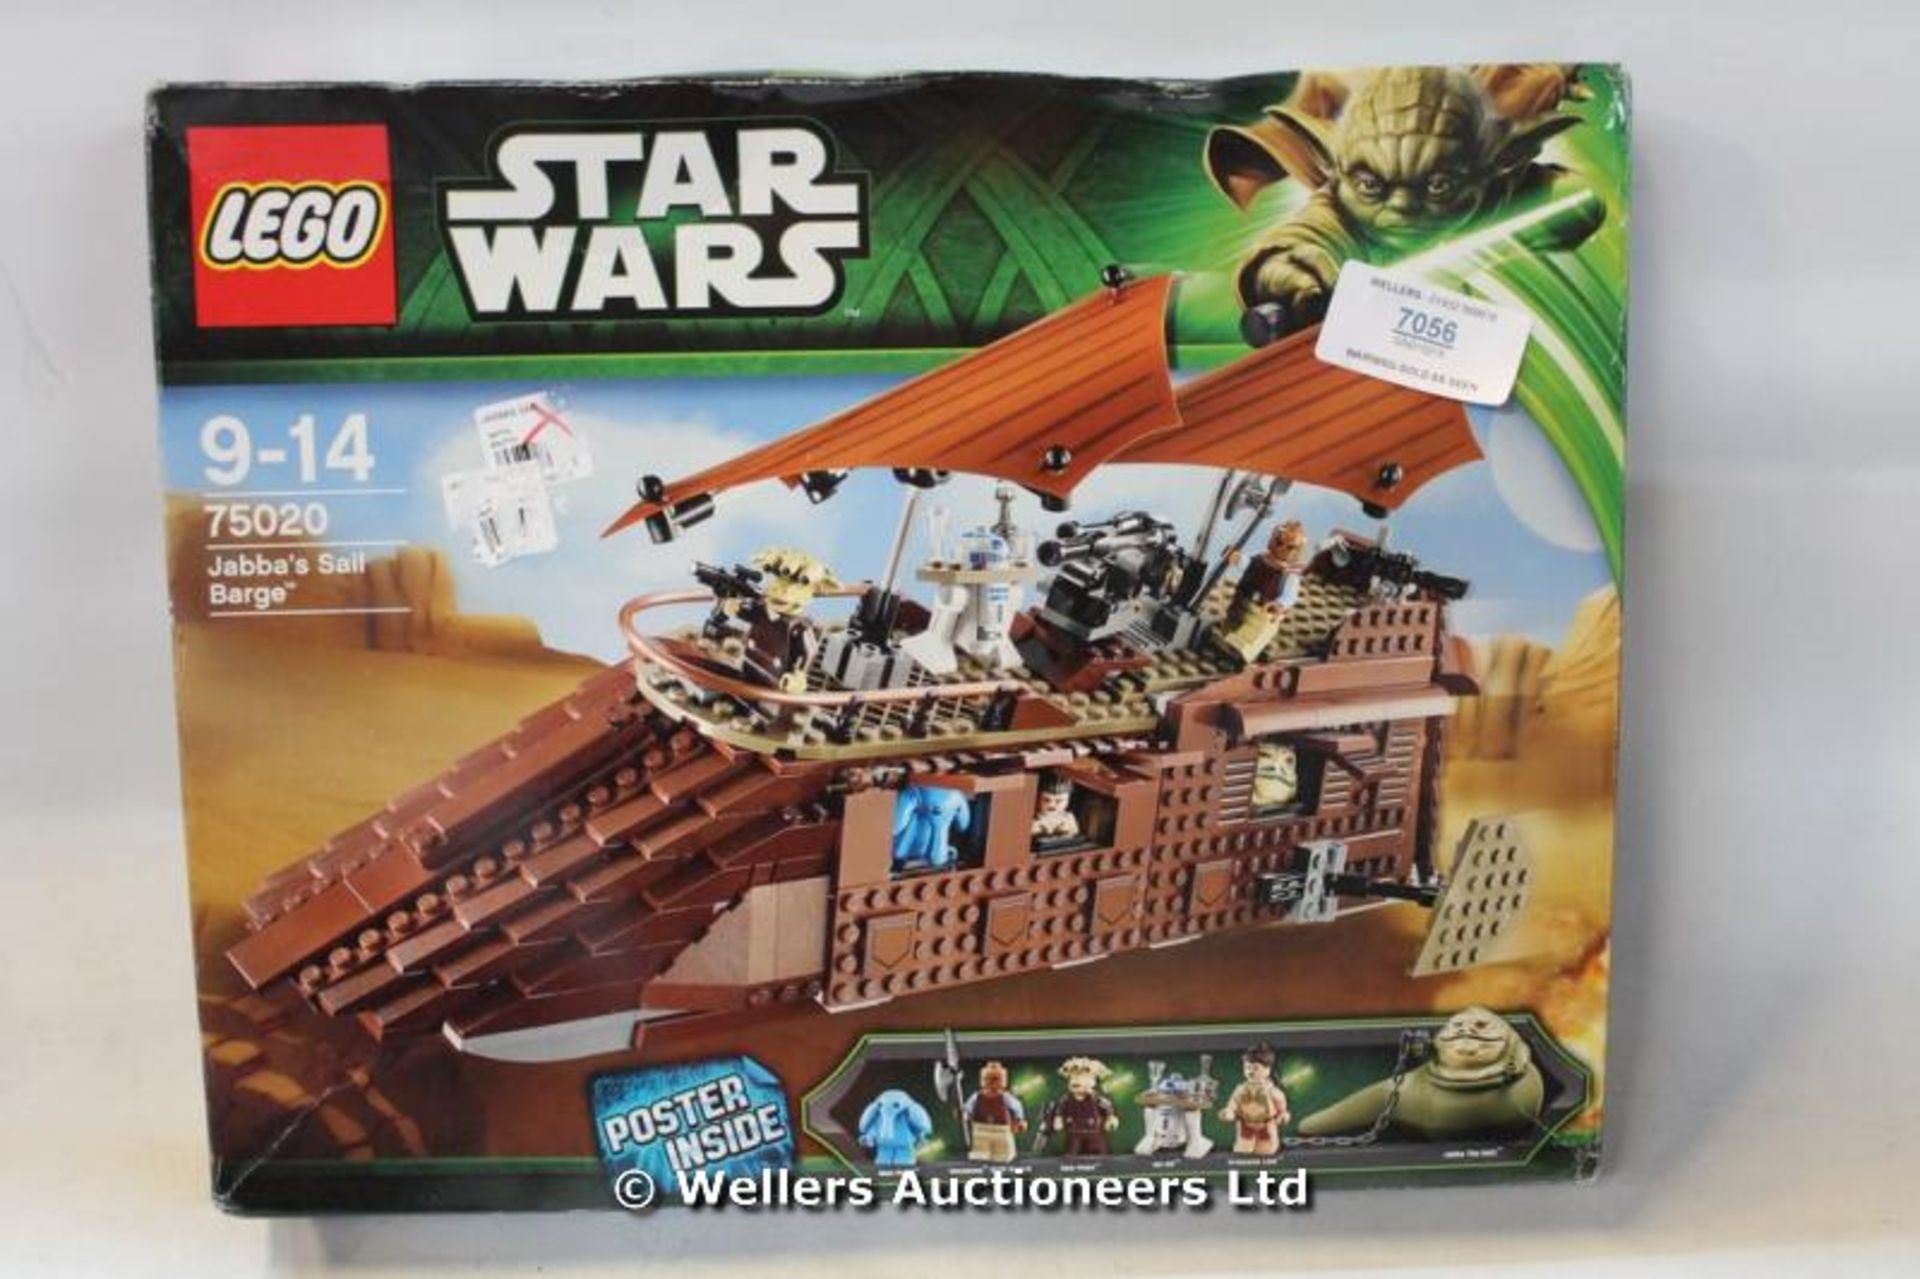 *LEGO STAR WARS JABBA'S SAIL BARGE 75020 / GRADE: UNCLAIMED PROPERTY / BOXED (DC3) {#GN010215 [